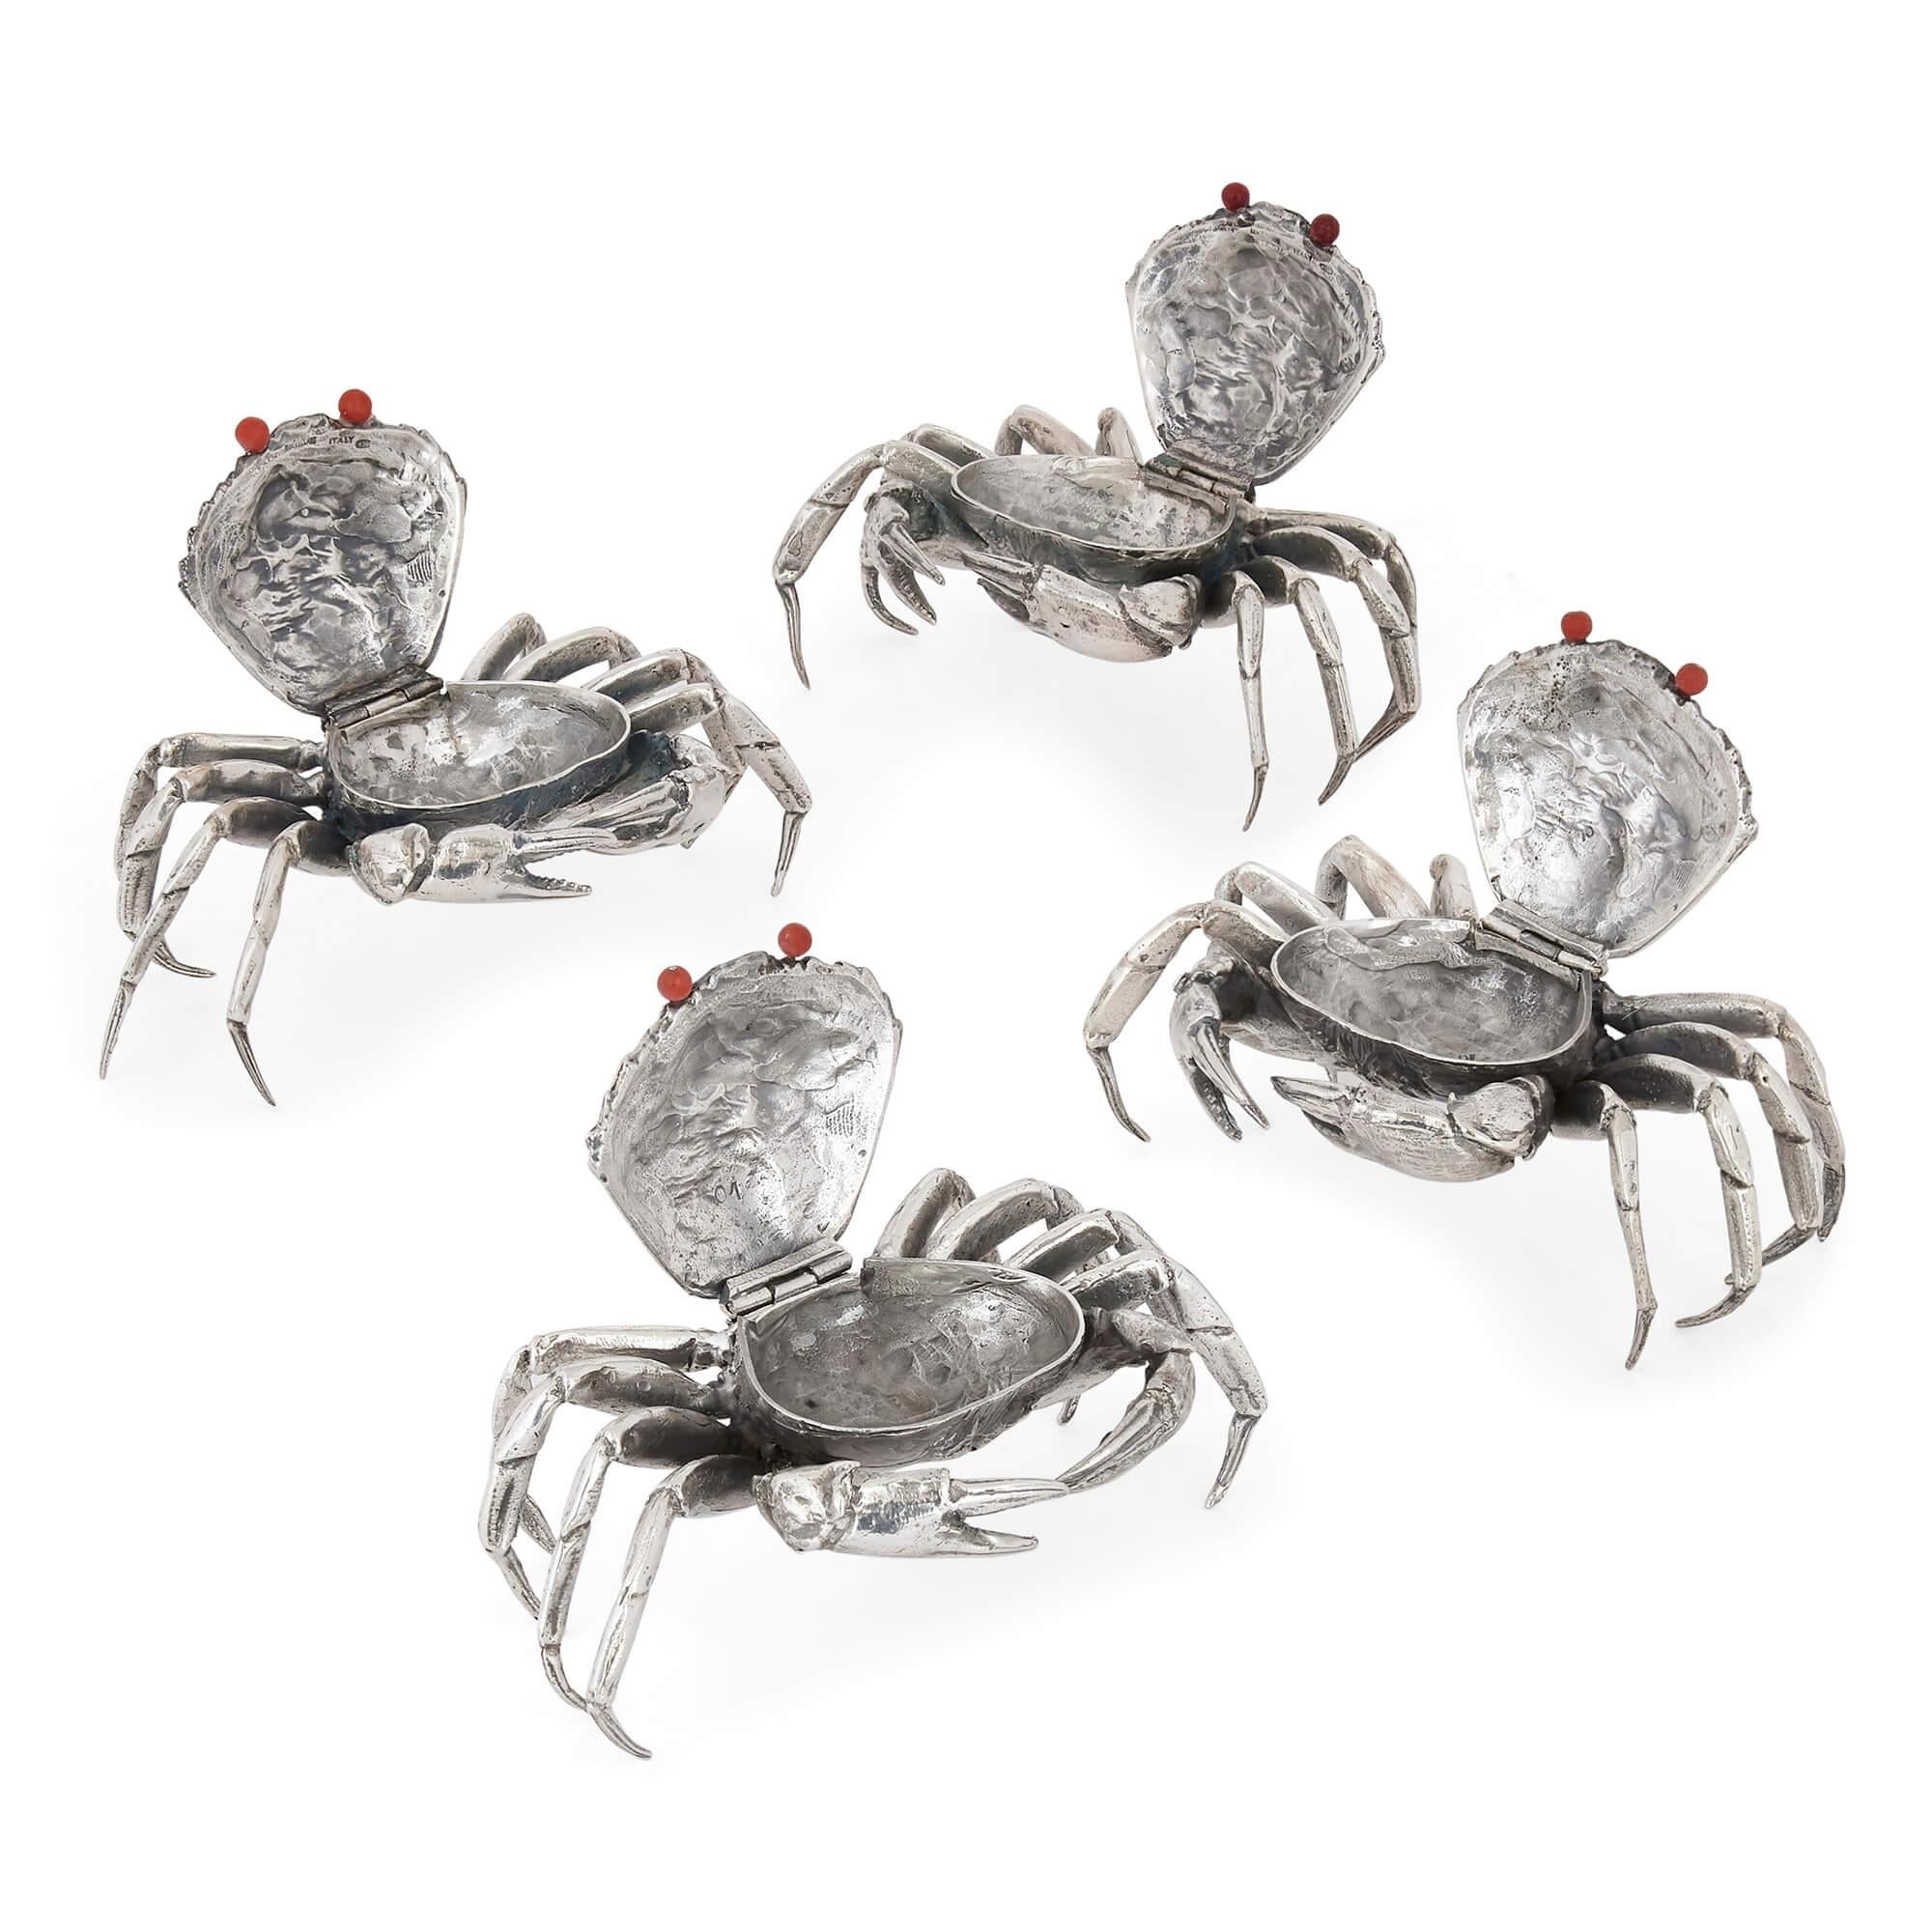 A set of four sterling silver crab-form boxes by Buccellati
Italian, 20th Century
Height 5cm, width 11cm, depth 7cm

Crafted by Mabuti in Milan, Italy, and retailed by Buccellati these quirky, charming, and playful silver boxes are full of